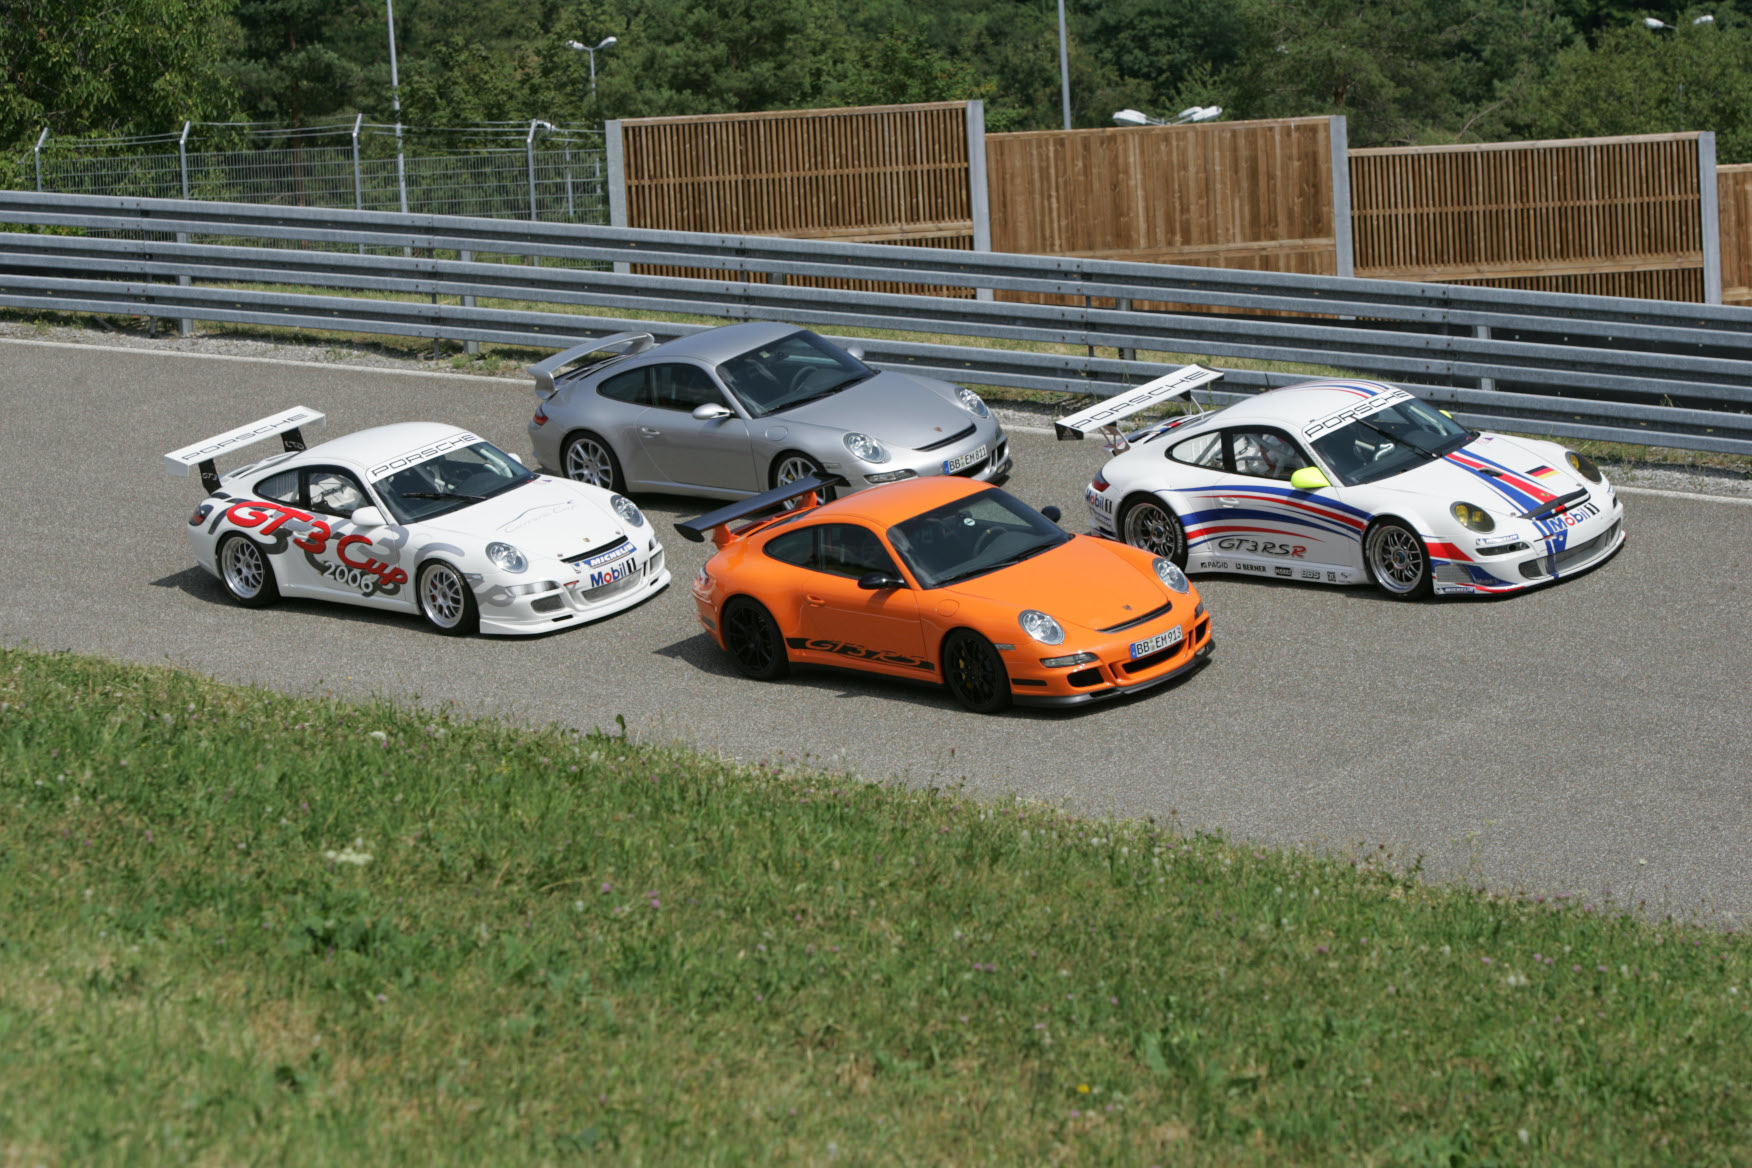 The Type 997 GT3 family, from left to right: GT3 Cup Race Car, GT3, GT3 RS, and GT3 RSR Endurance Race Car